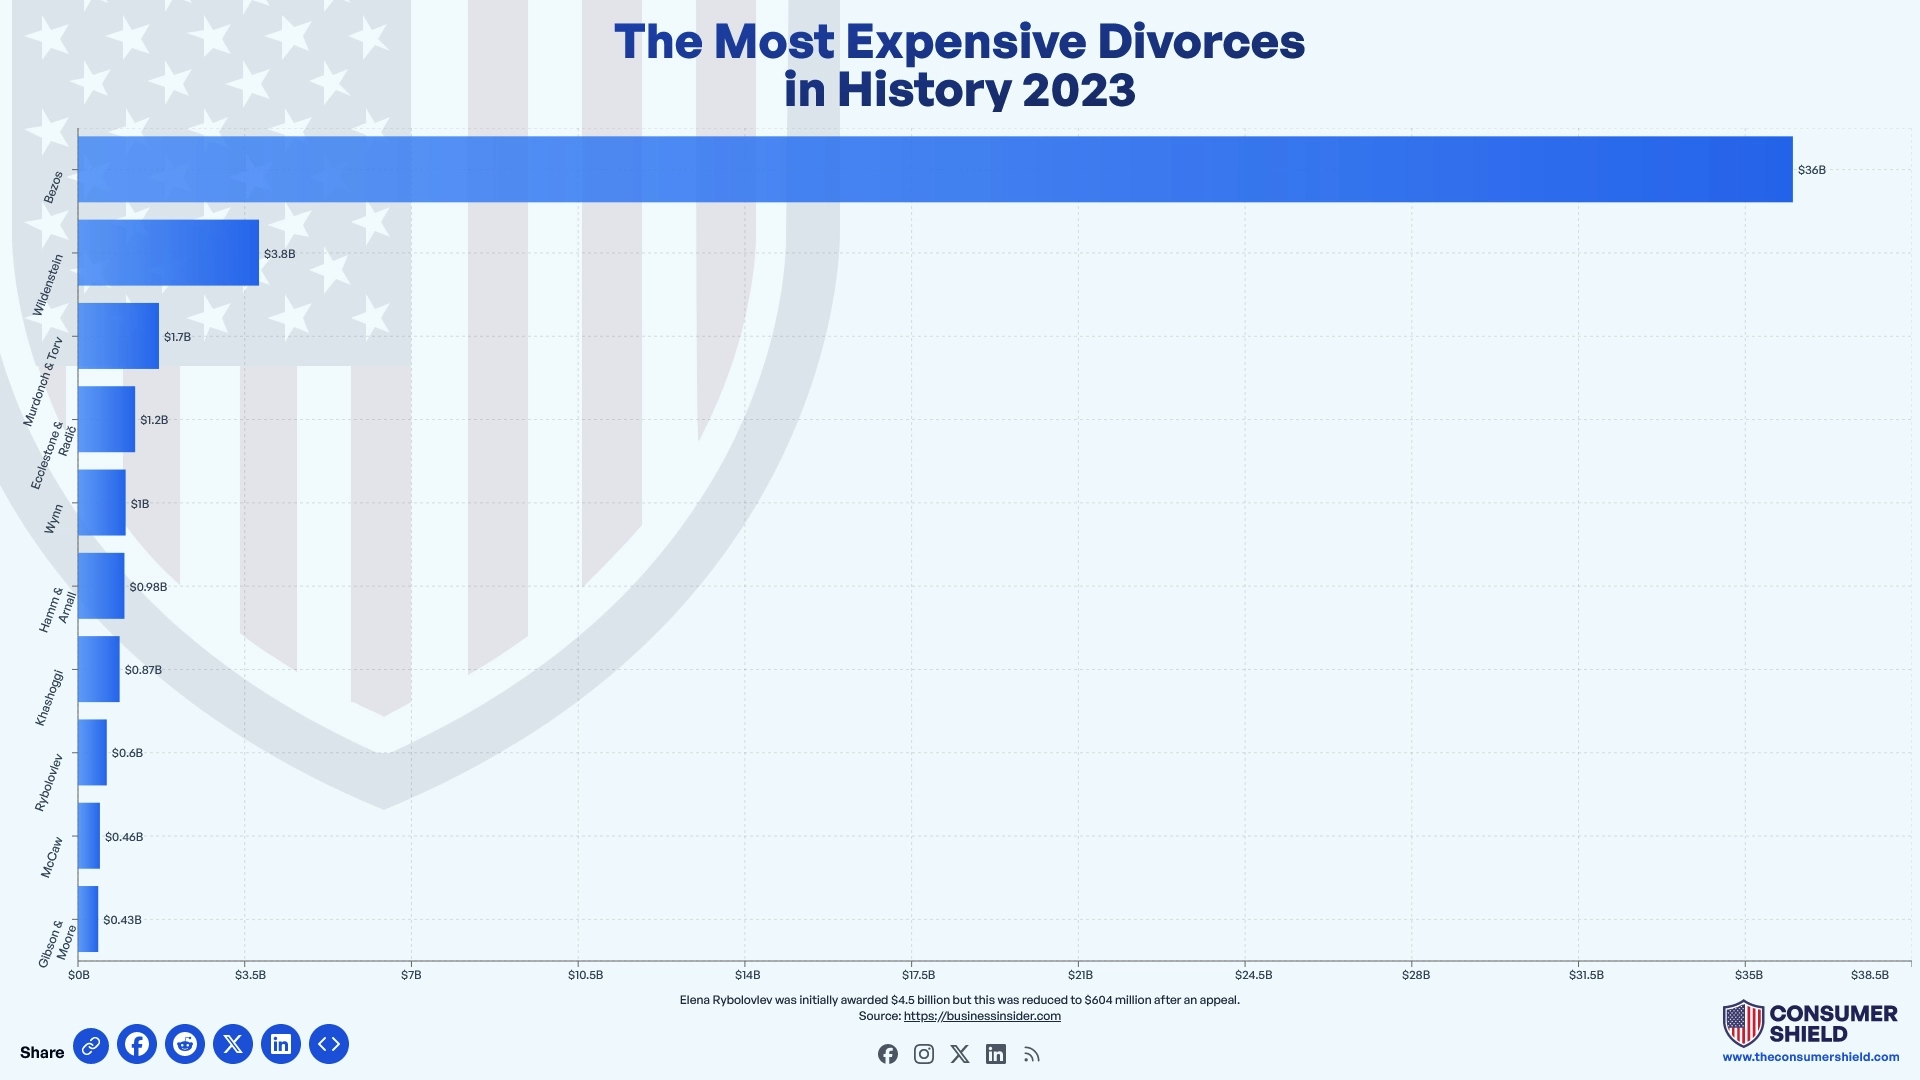 The Most Expensive Divorces in History 2023